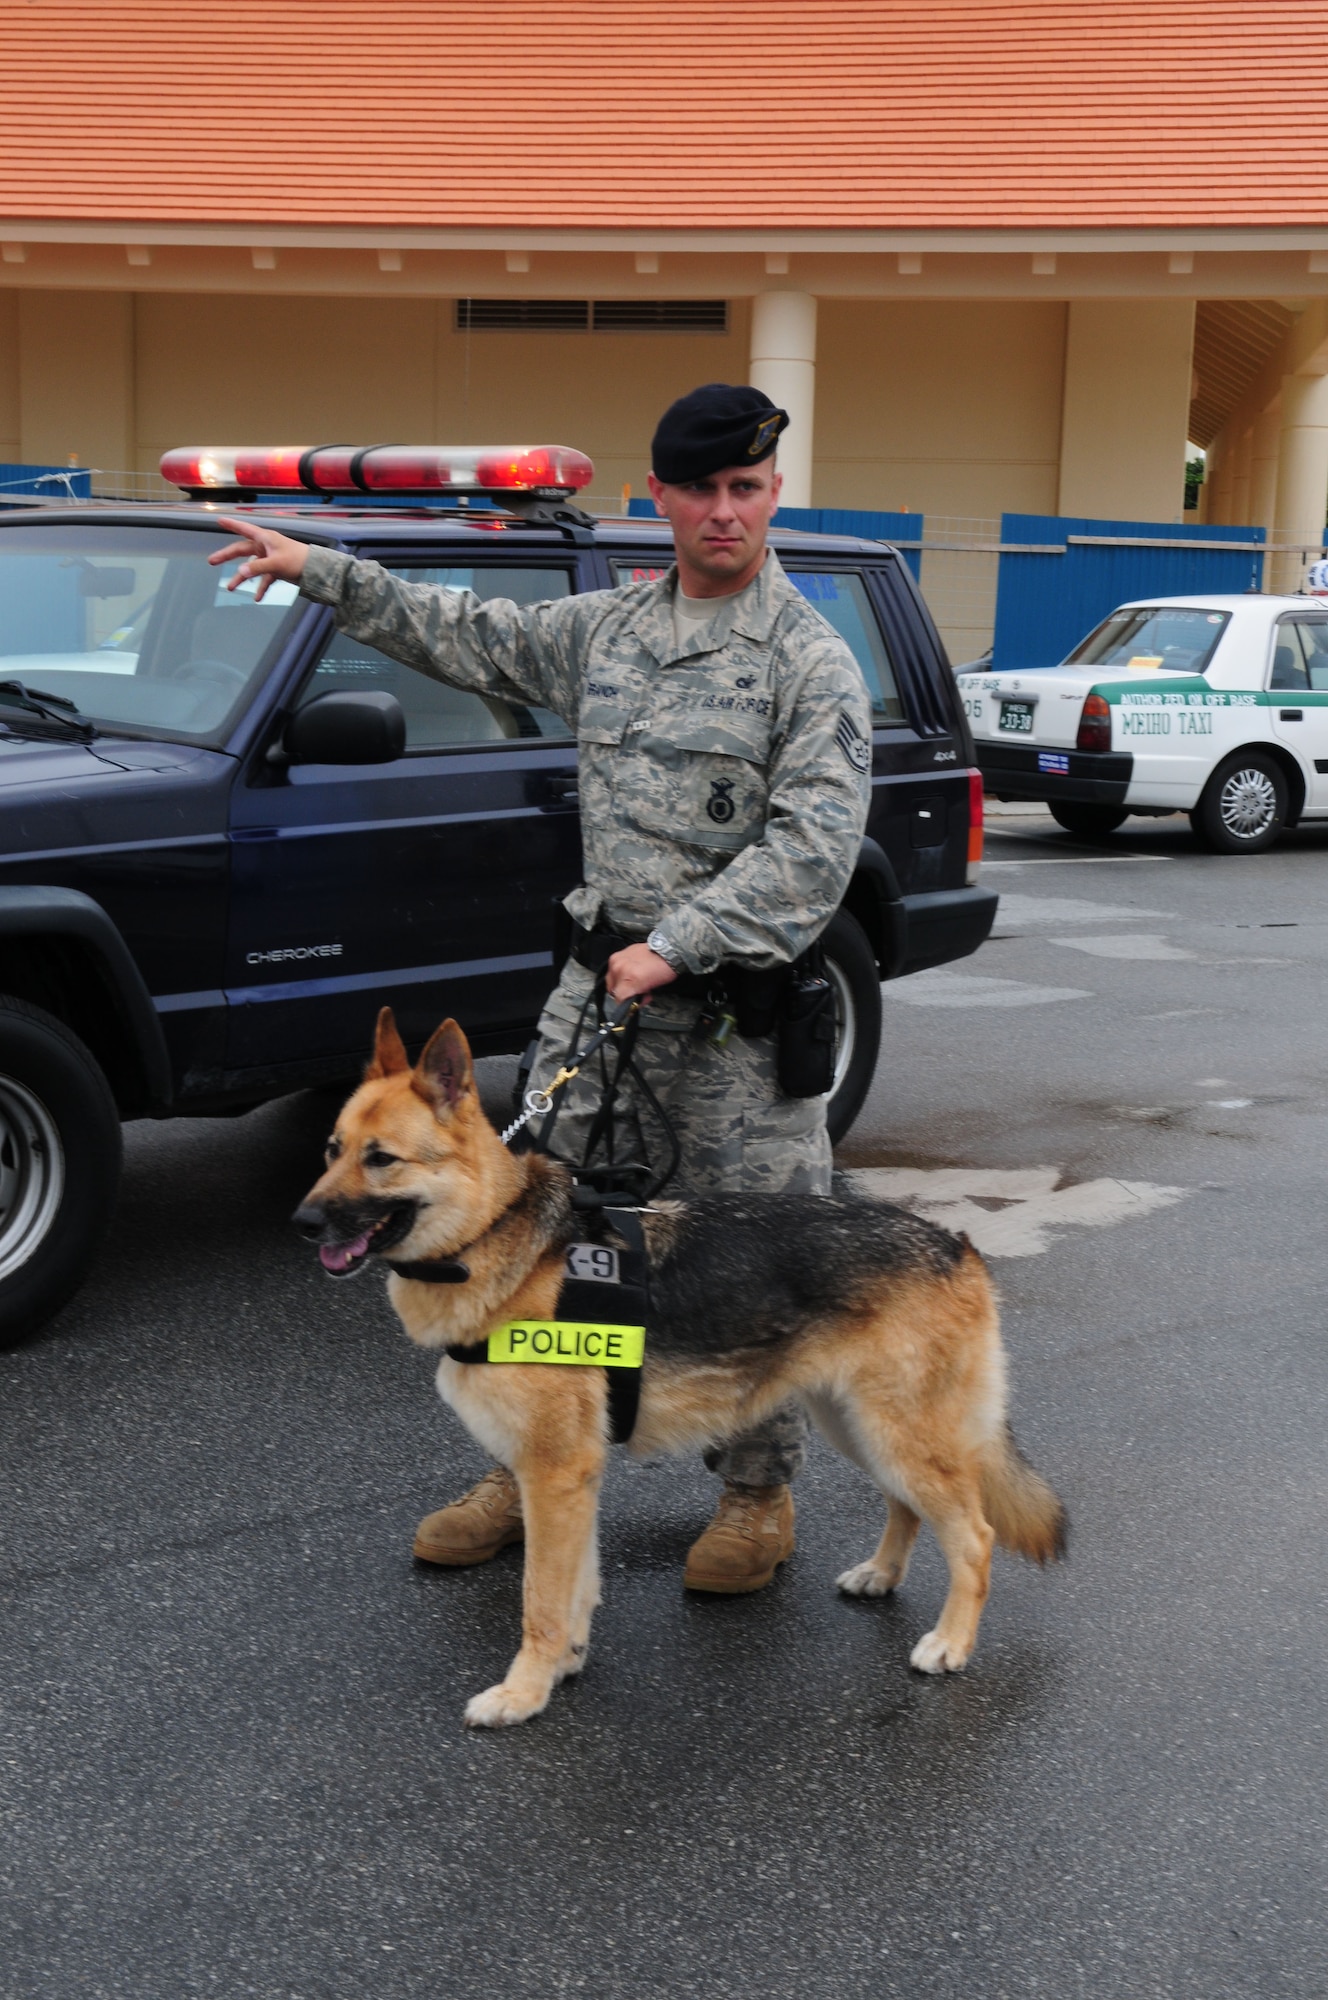 Zena, an 18th Security Forces military working dog, stands by her handler, Staff Sgt. Joshua Branch, before approaching a suspected bank robber during Beverly High 09-2 Local Operational Readiness Exercise May 12. The LORE tests base personnel on their readiness for real world emergency/ combat events. (U.S. Air Force photo/ Staff Sgt. Lakisha A. Croley)